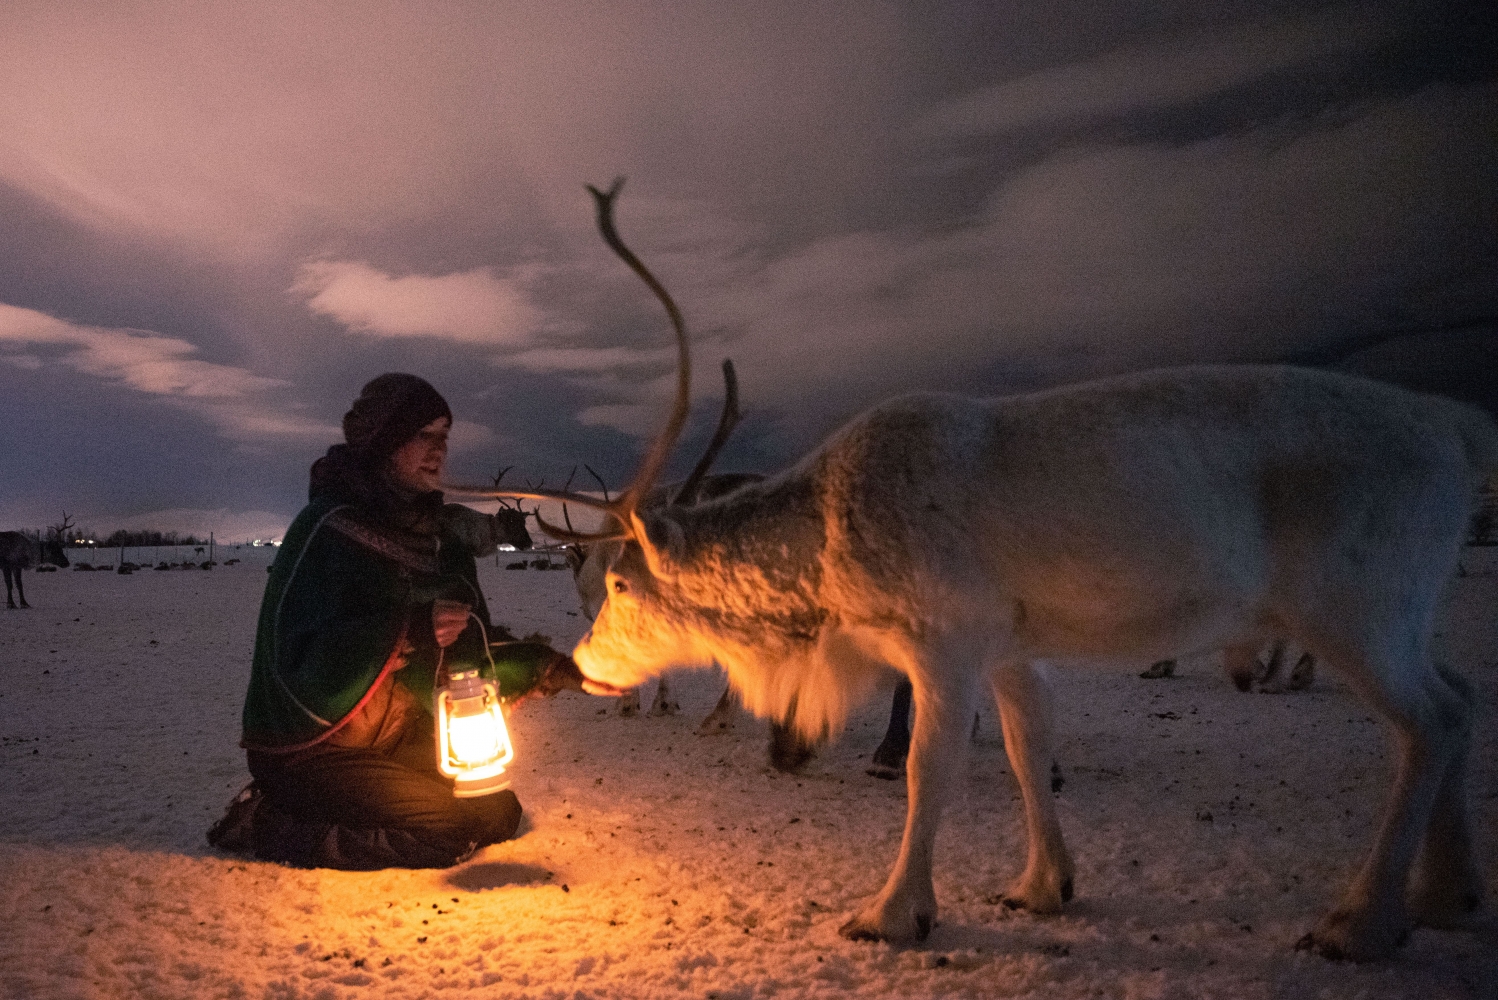 Reindeer Camp Dinner with Chance of Northern Lights